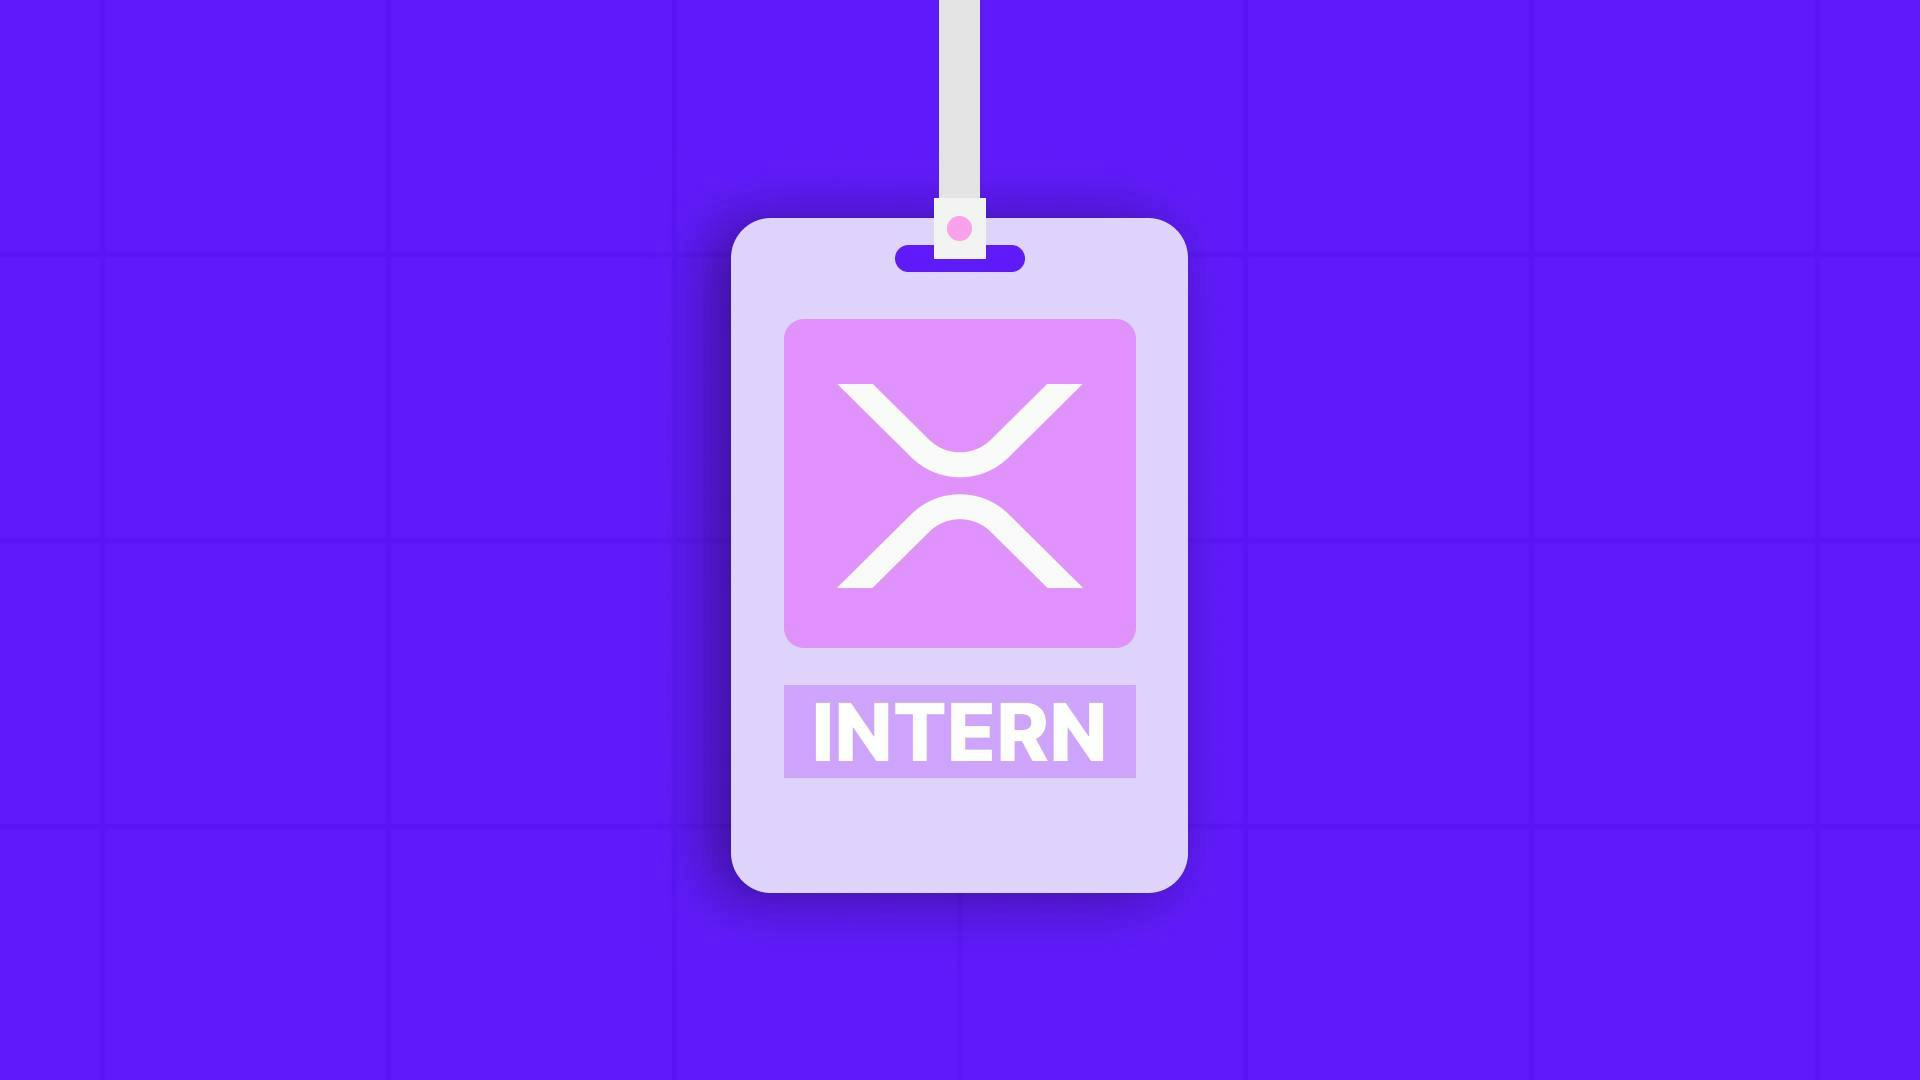 Are You A Student? Here Are The Open Internships at Ripple